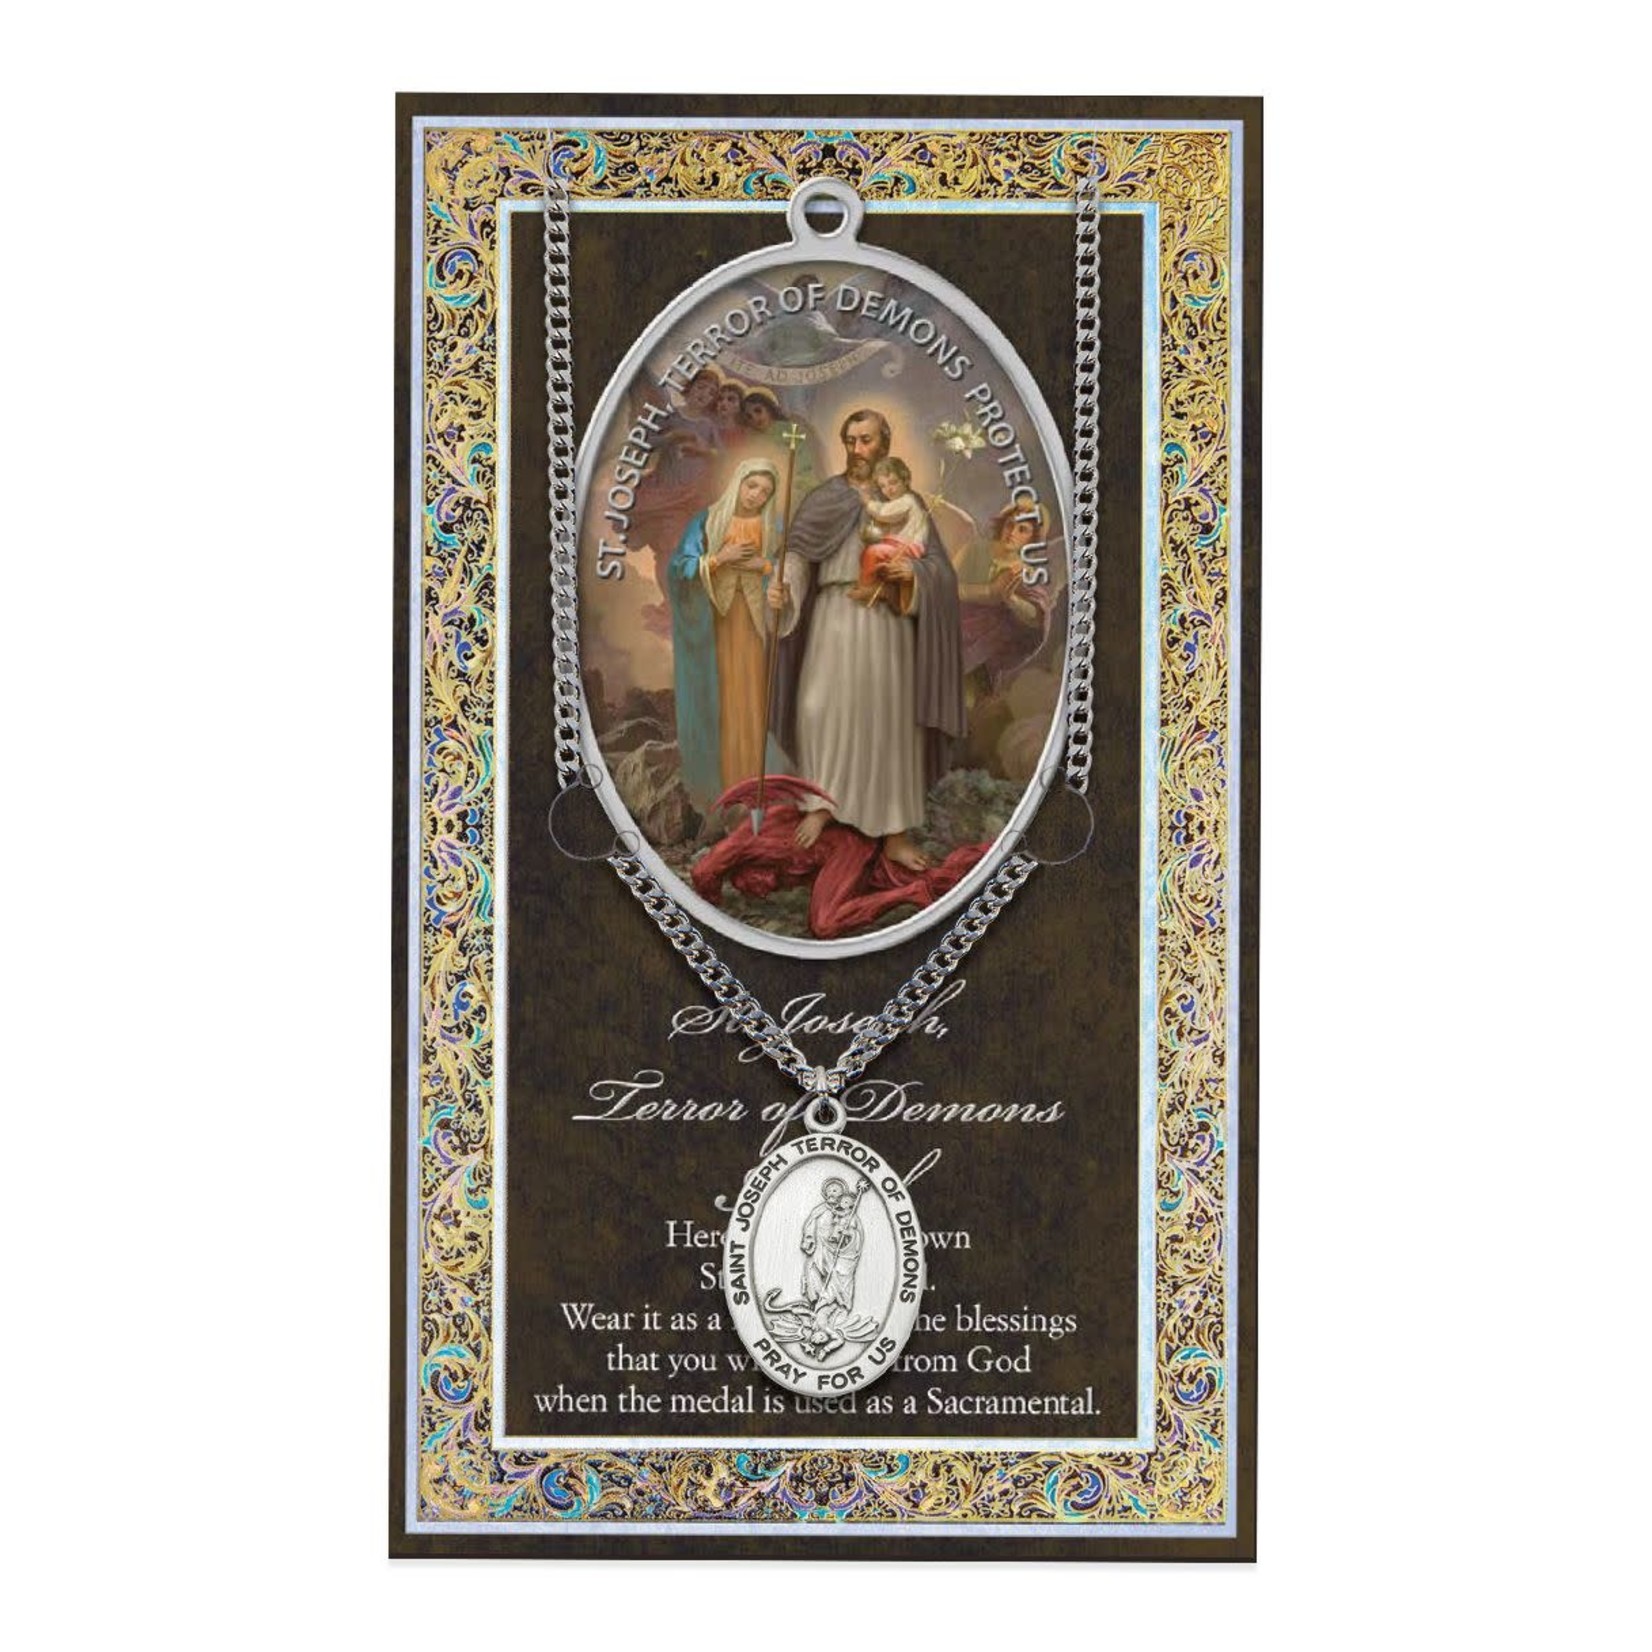 St Joseph Terror of Demons Pewter Medal with Booklet